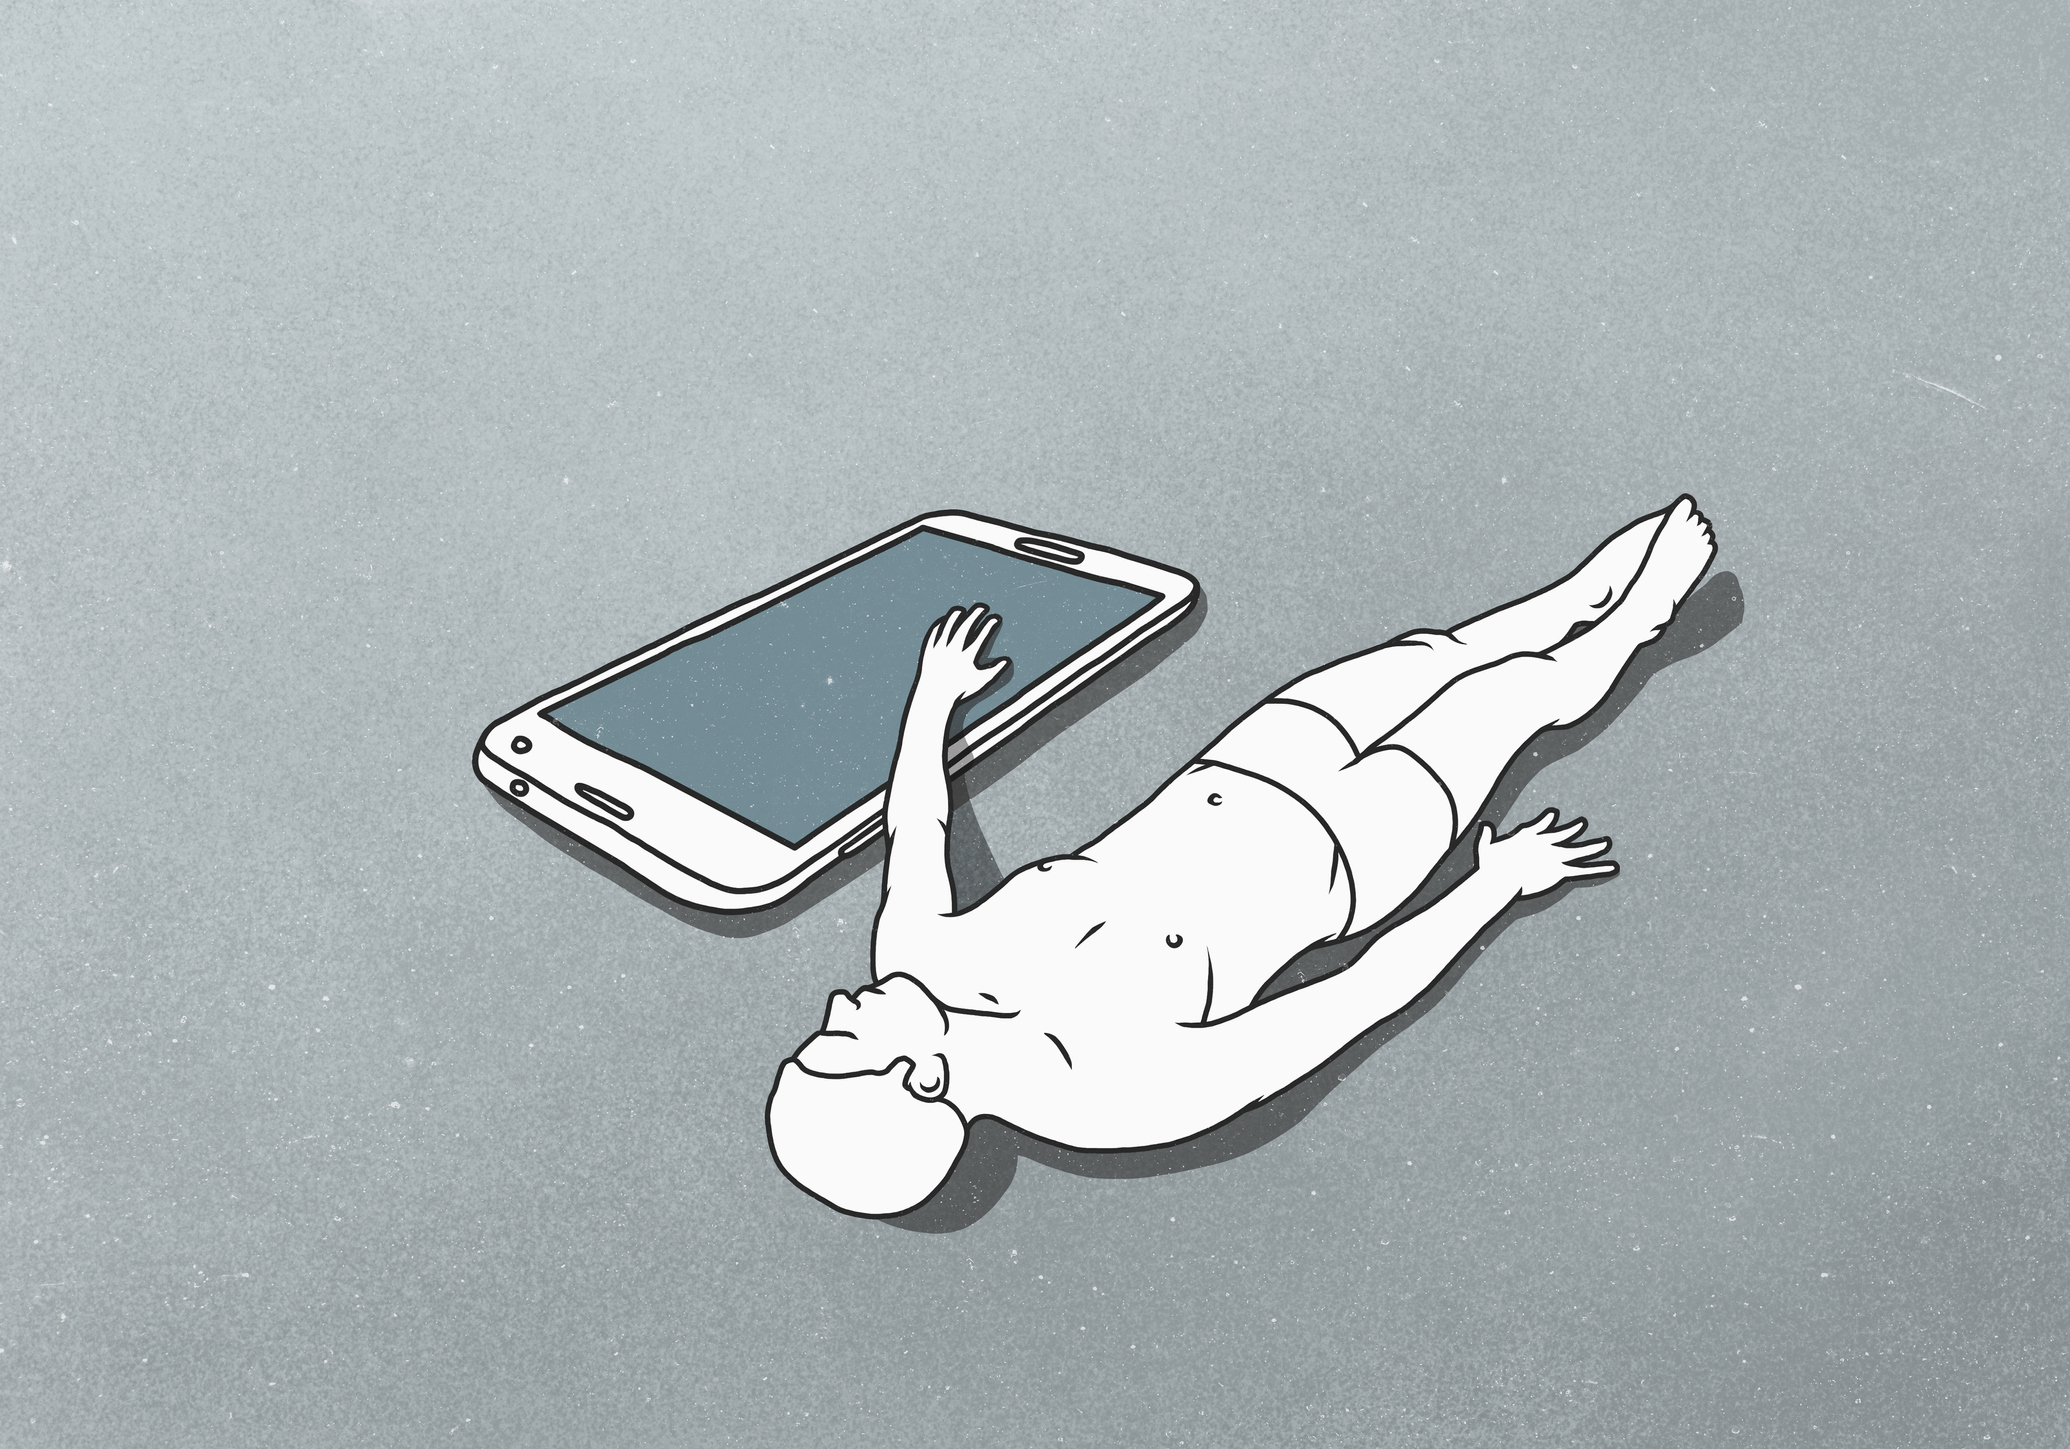 A male figure lying down with hand on a large mobile phone